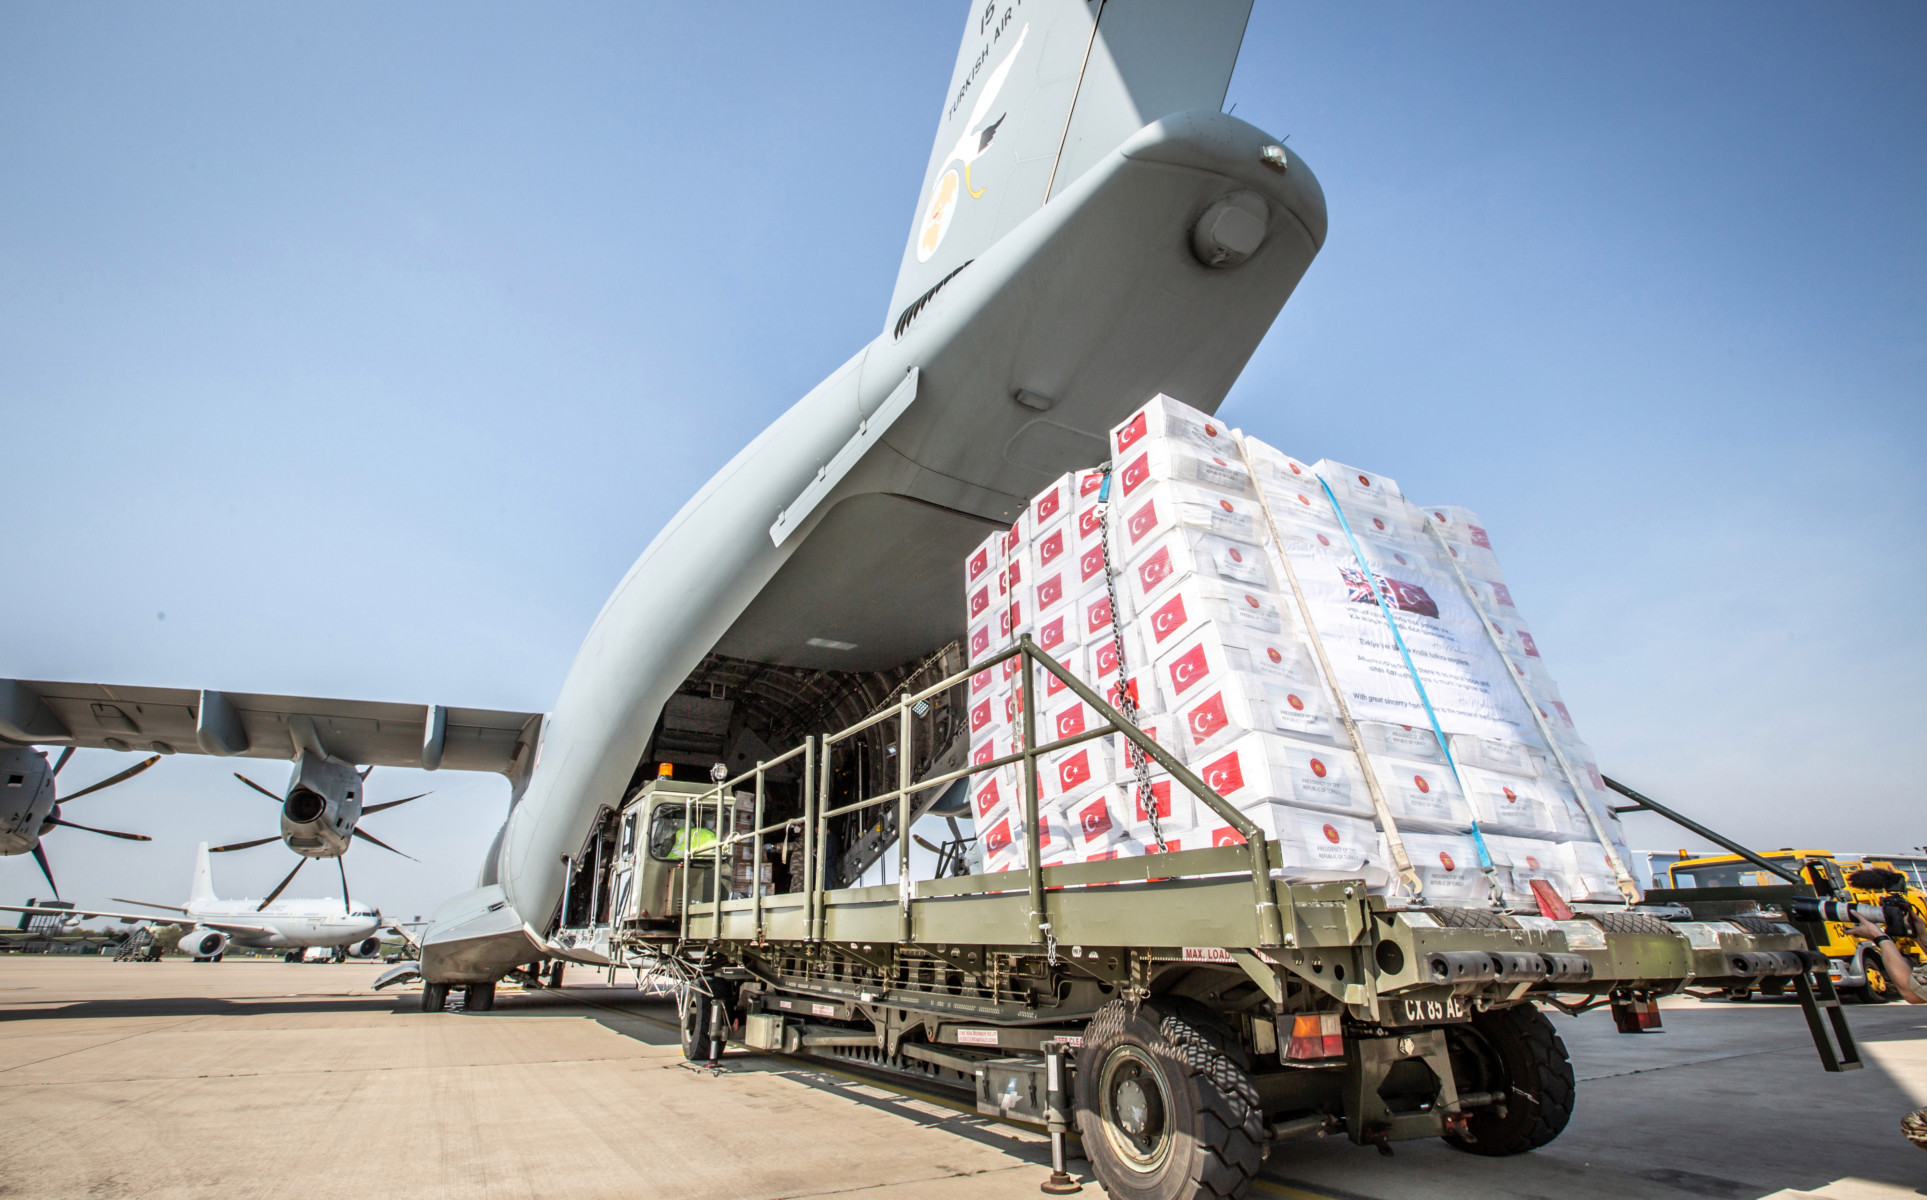 Turkey is one of the countries that has sent planeloads of emergency equipment to Britain, with the first flight carrying the equipment leaving yesterday